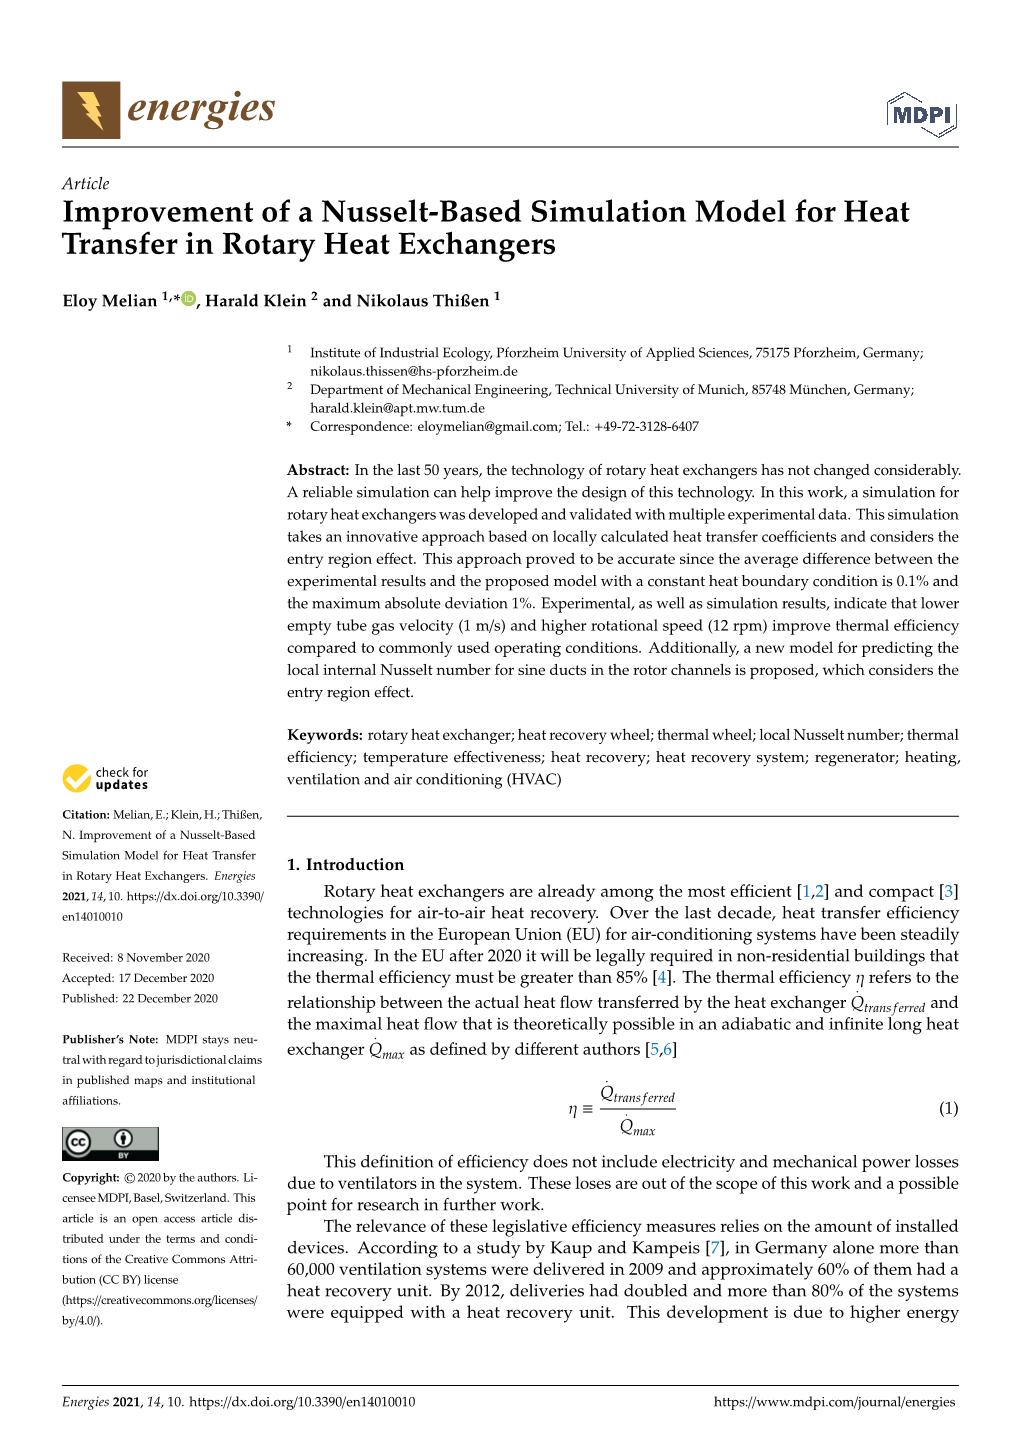 Improvement of a Nusselt-Based Simulation Model for Heat Transfer in Rotary Heat Exchangers